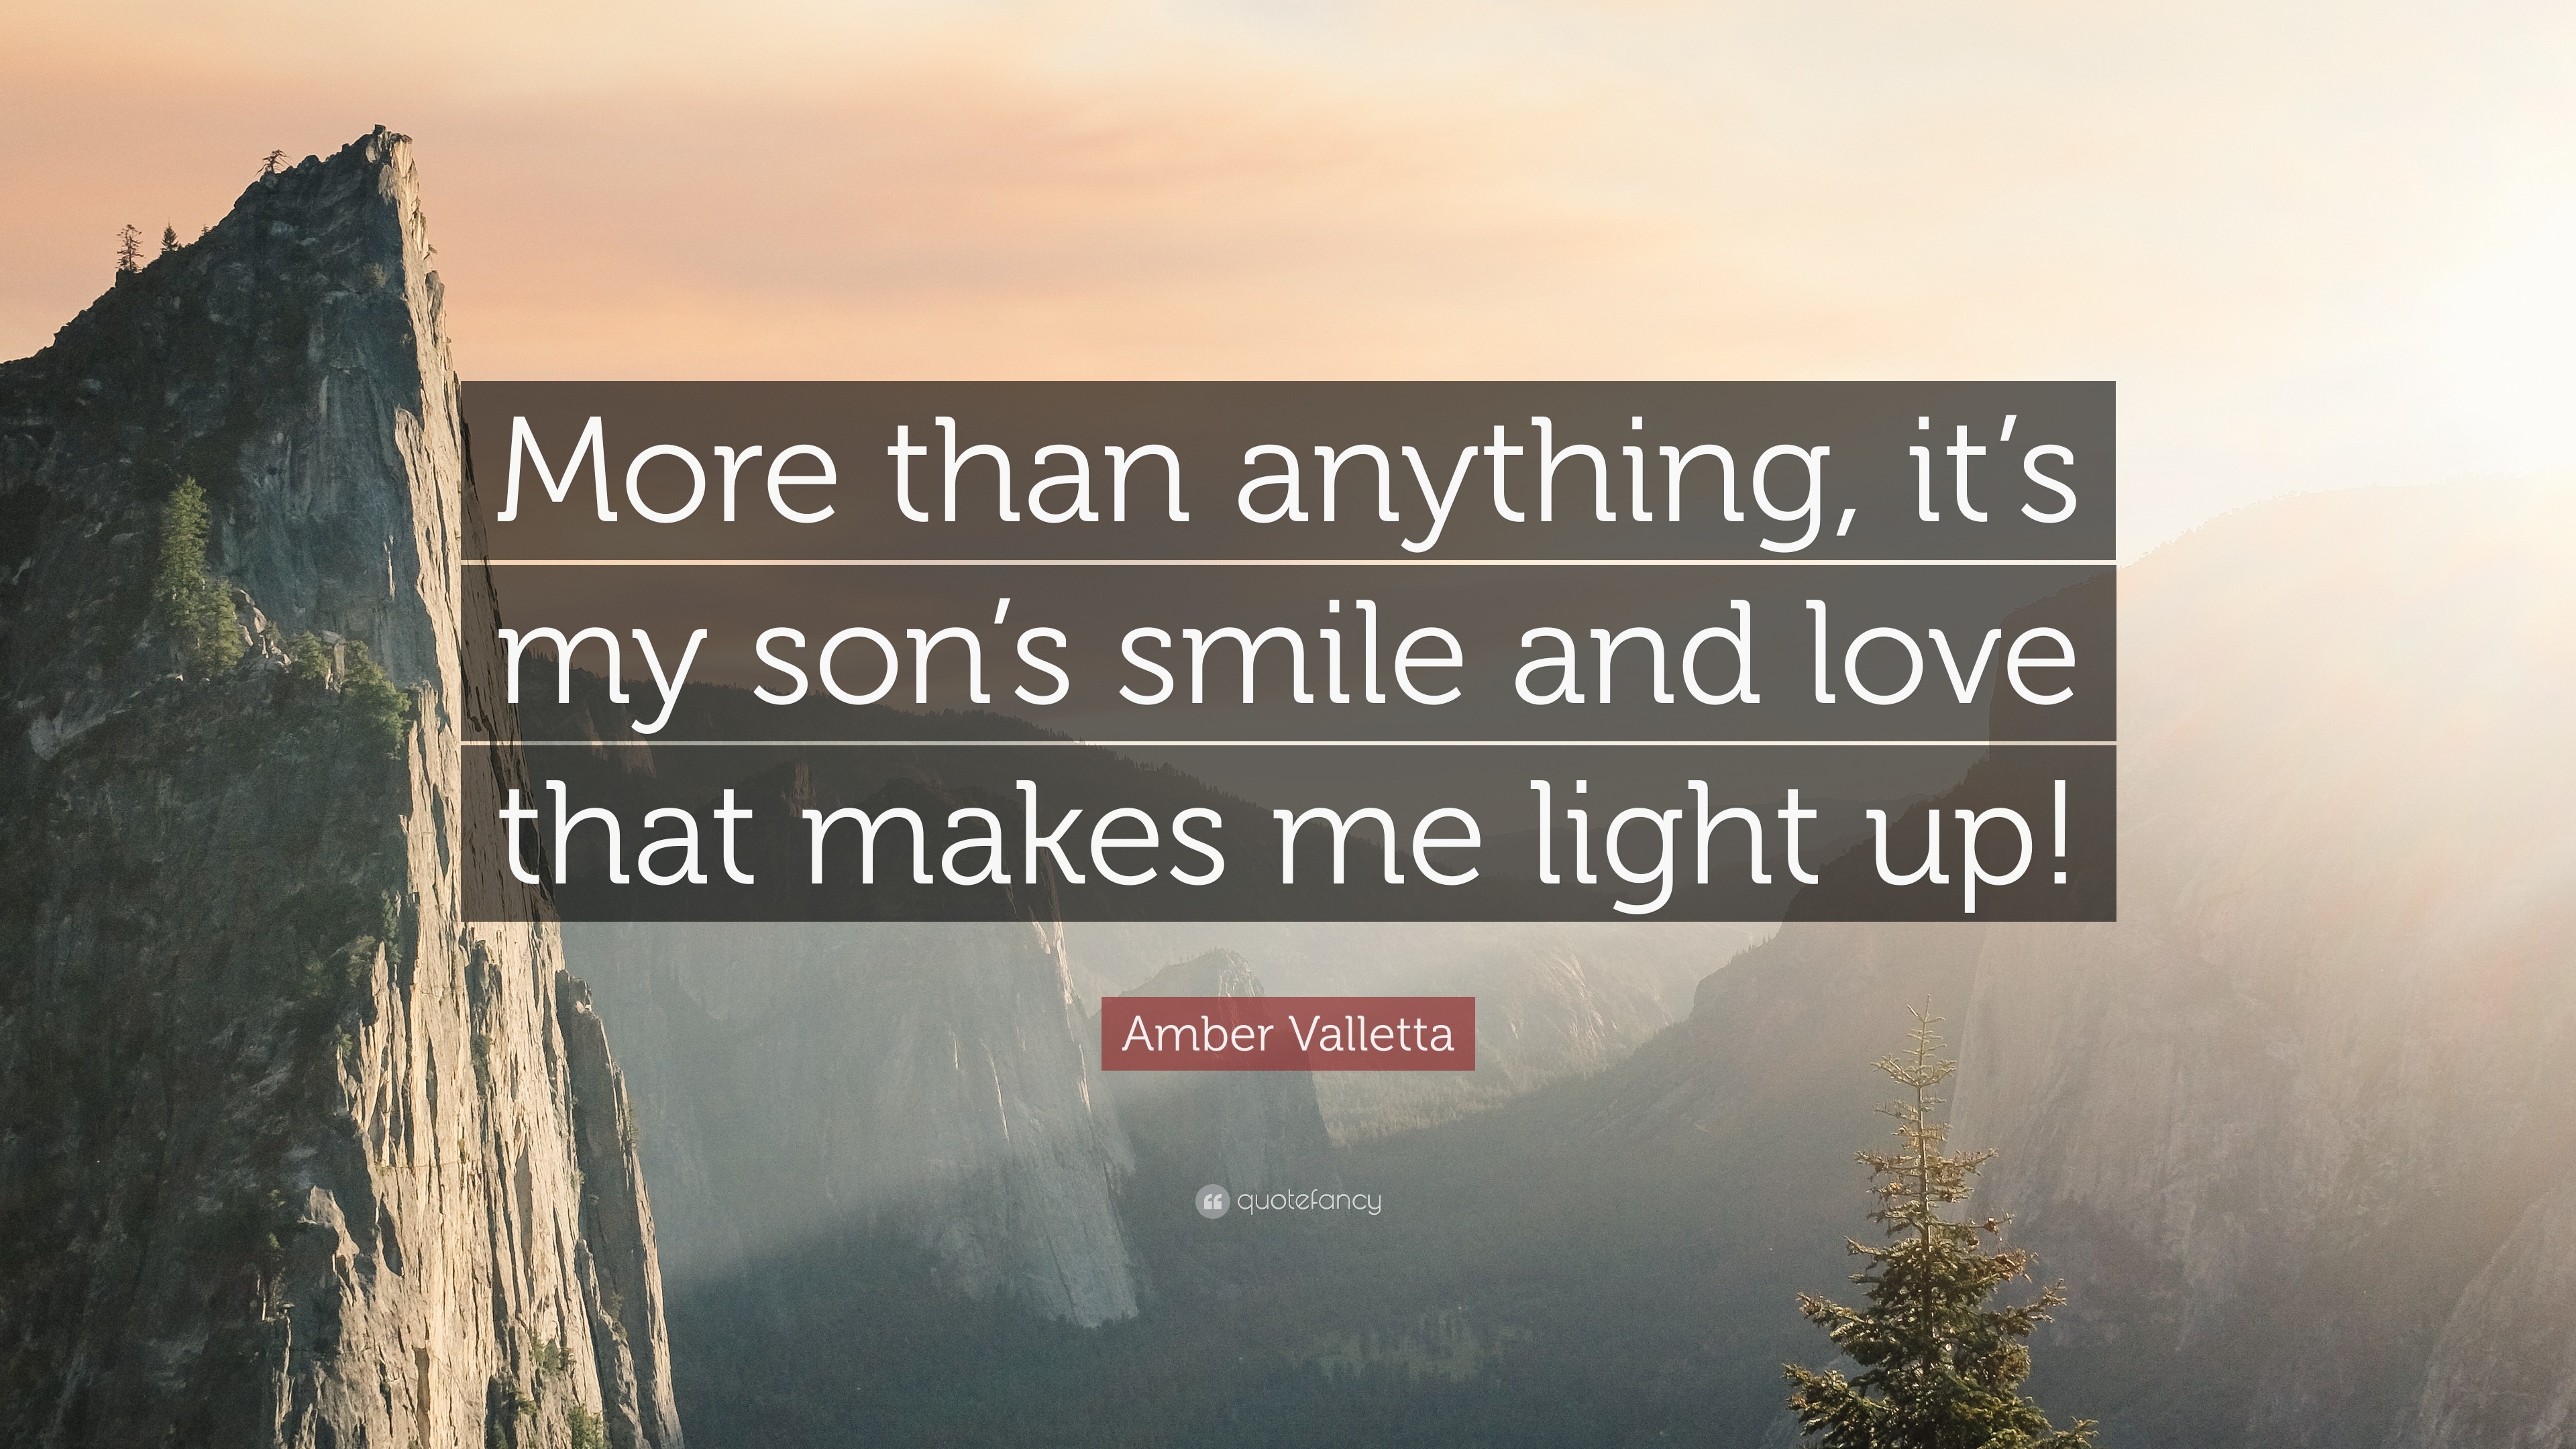 Amber Valletta Quote: "More than anything, it's my son's ...